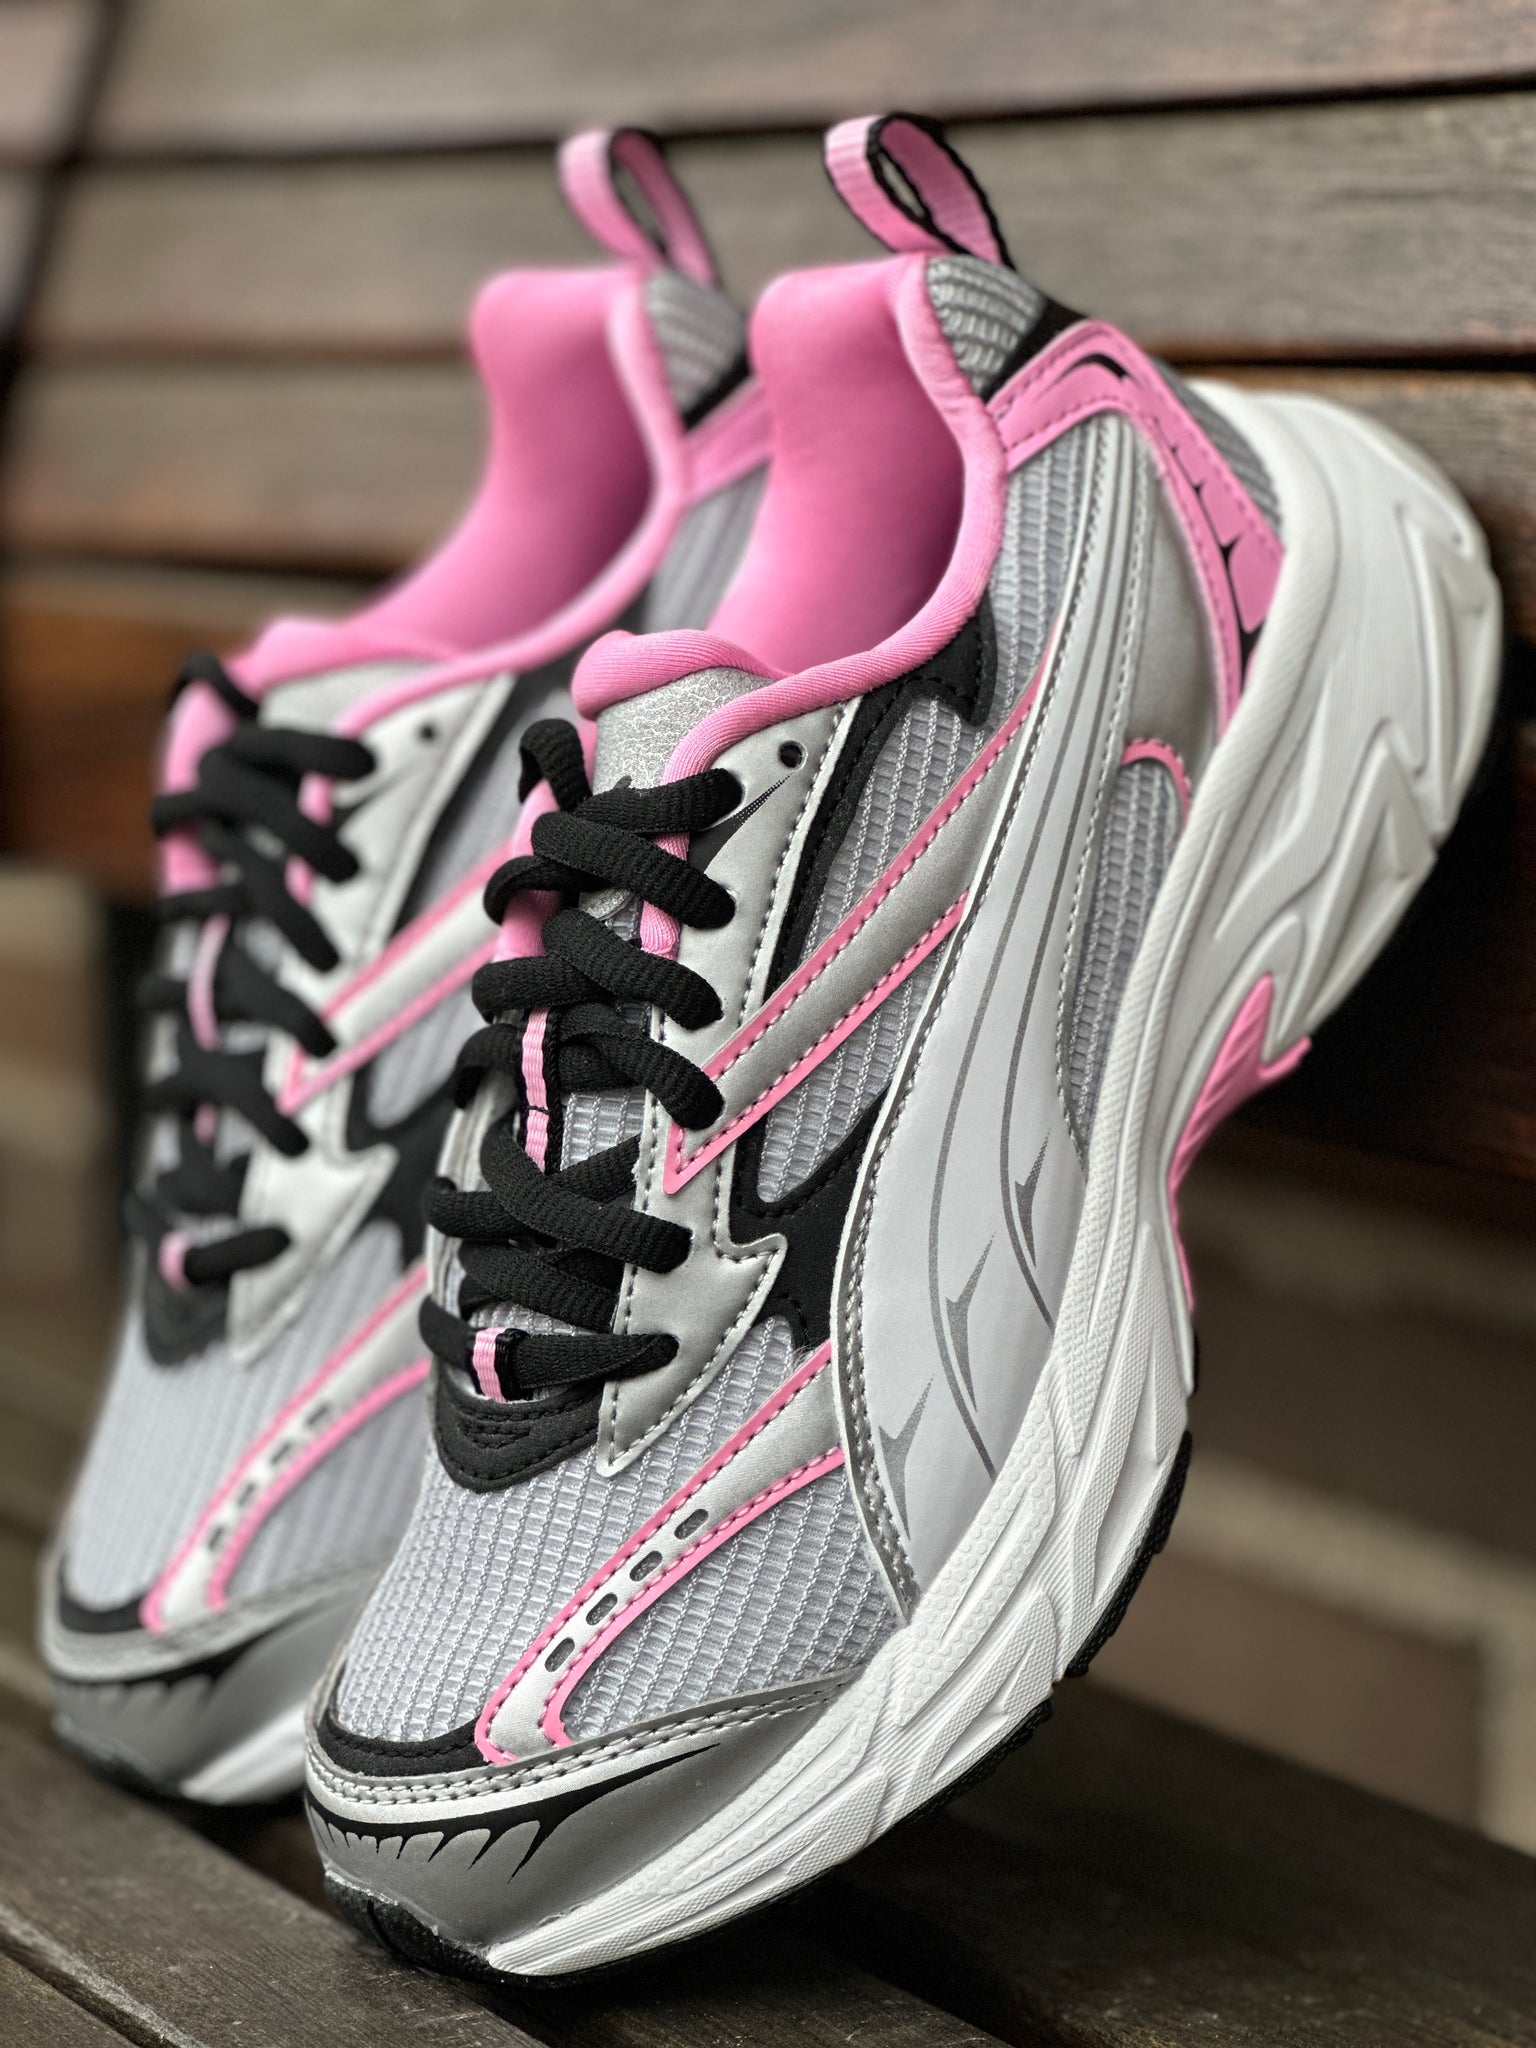 PUMA morphic atletic feather gray/pink